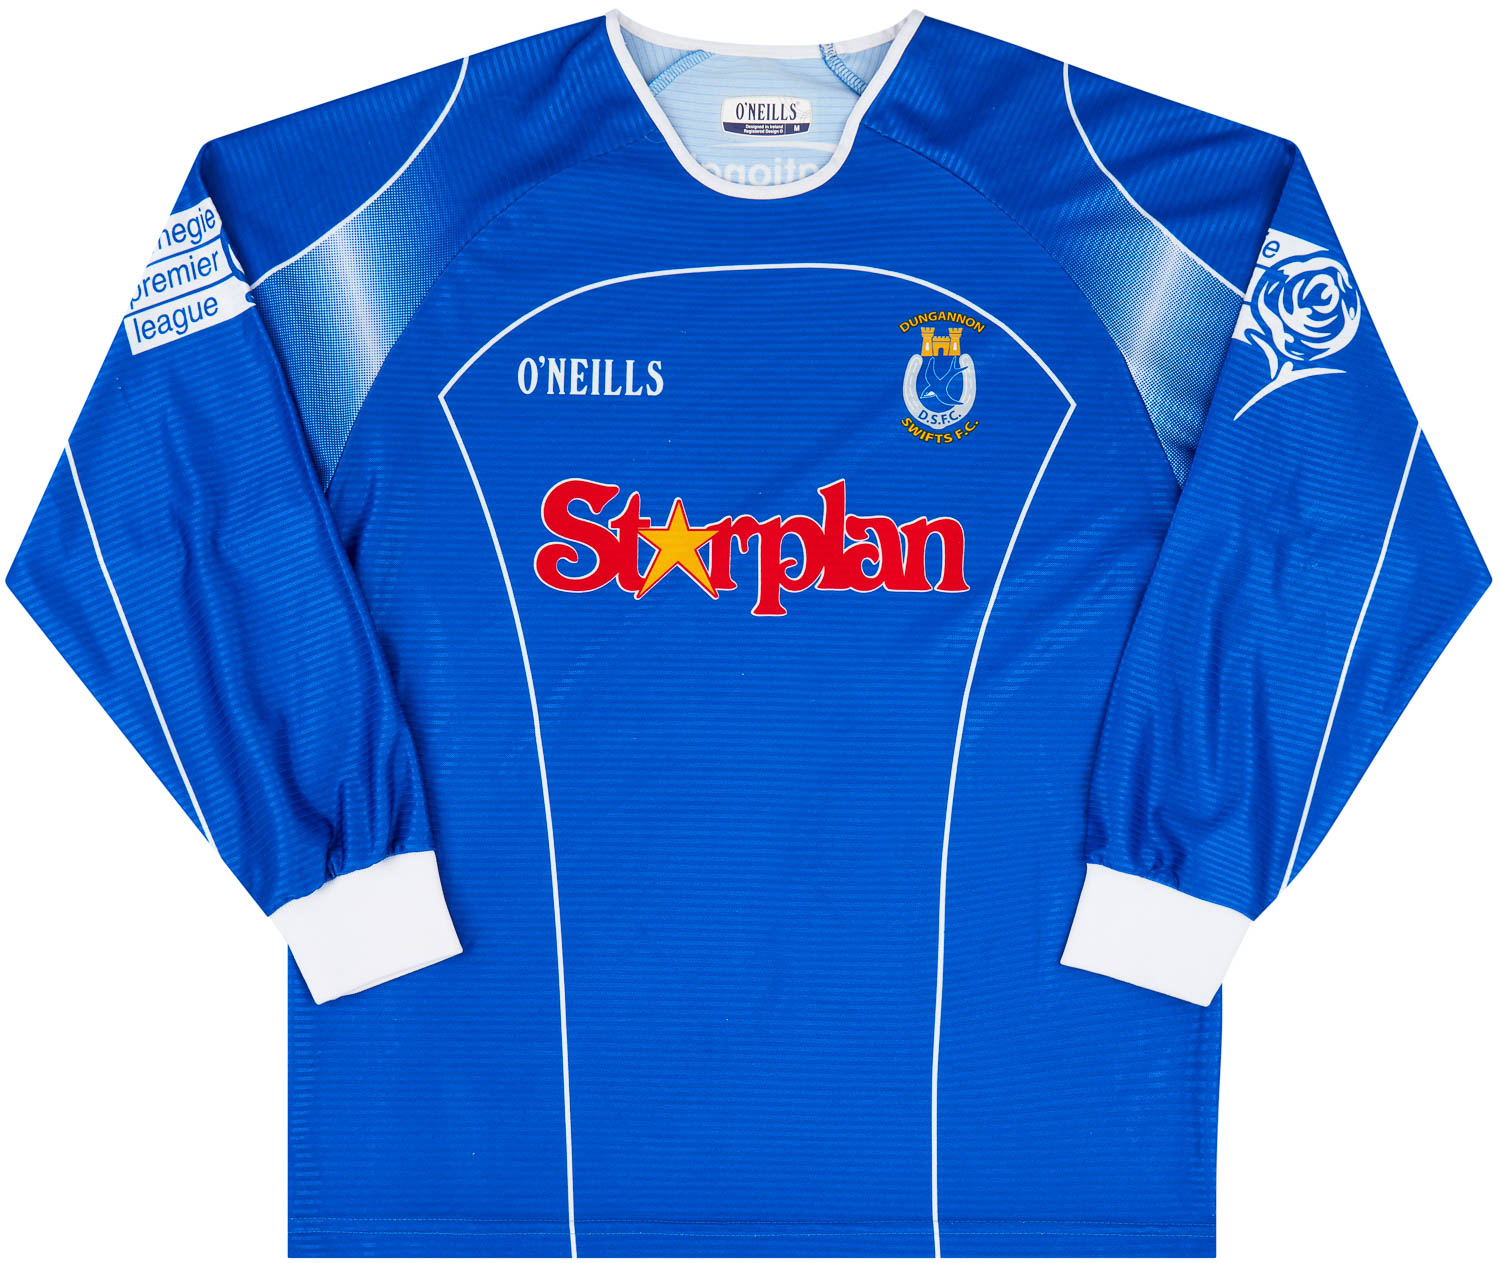 2006-07 Dungannon Swifts Match Issue Home Shirt #19